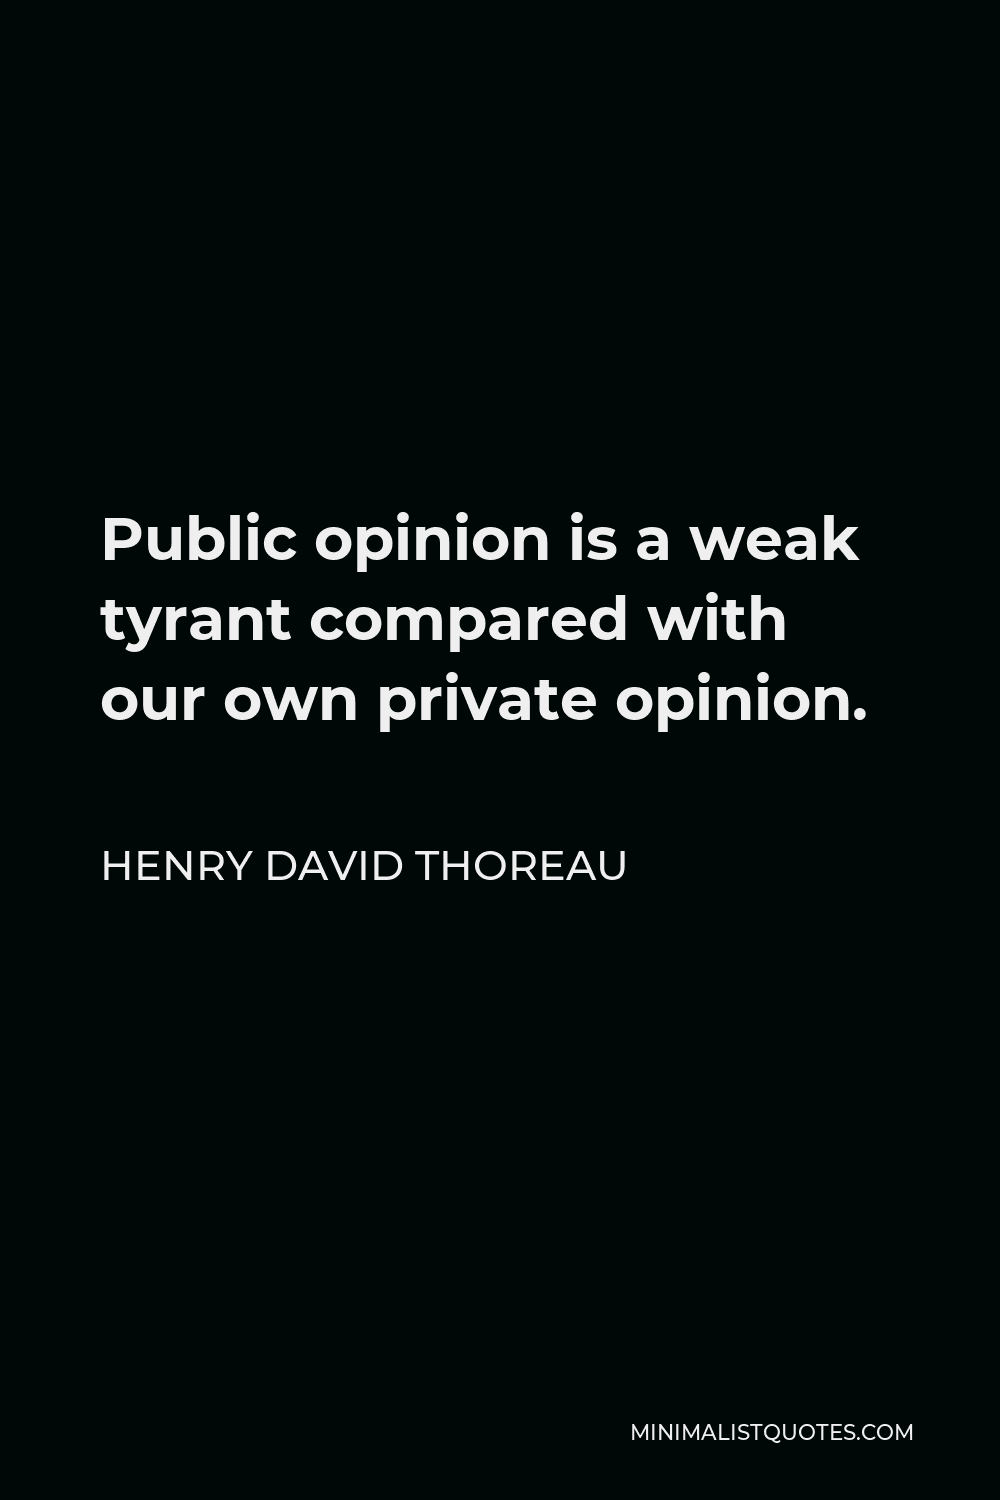 Henry David Thoreau Quote - Public opinion is a weak tyrant compared with our own private opinion.